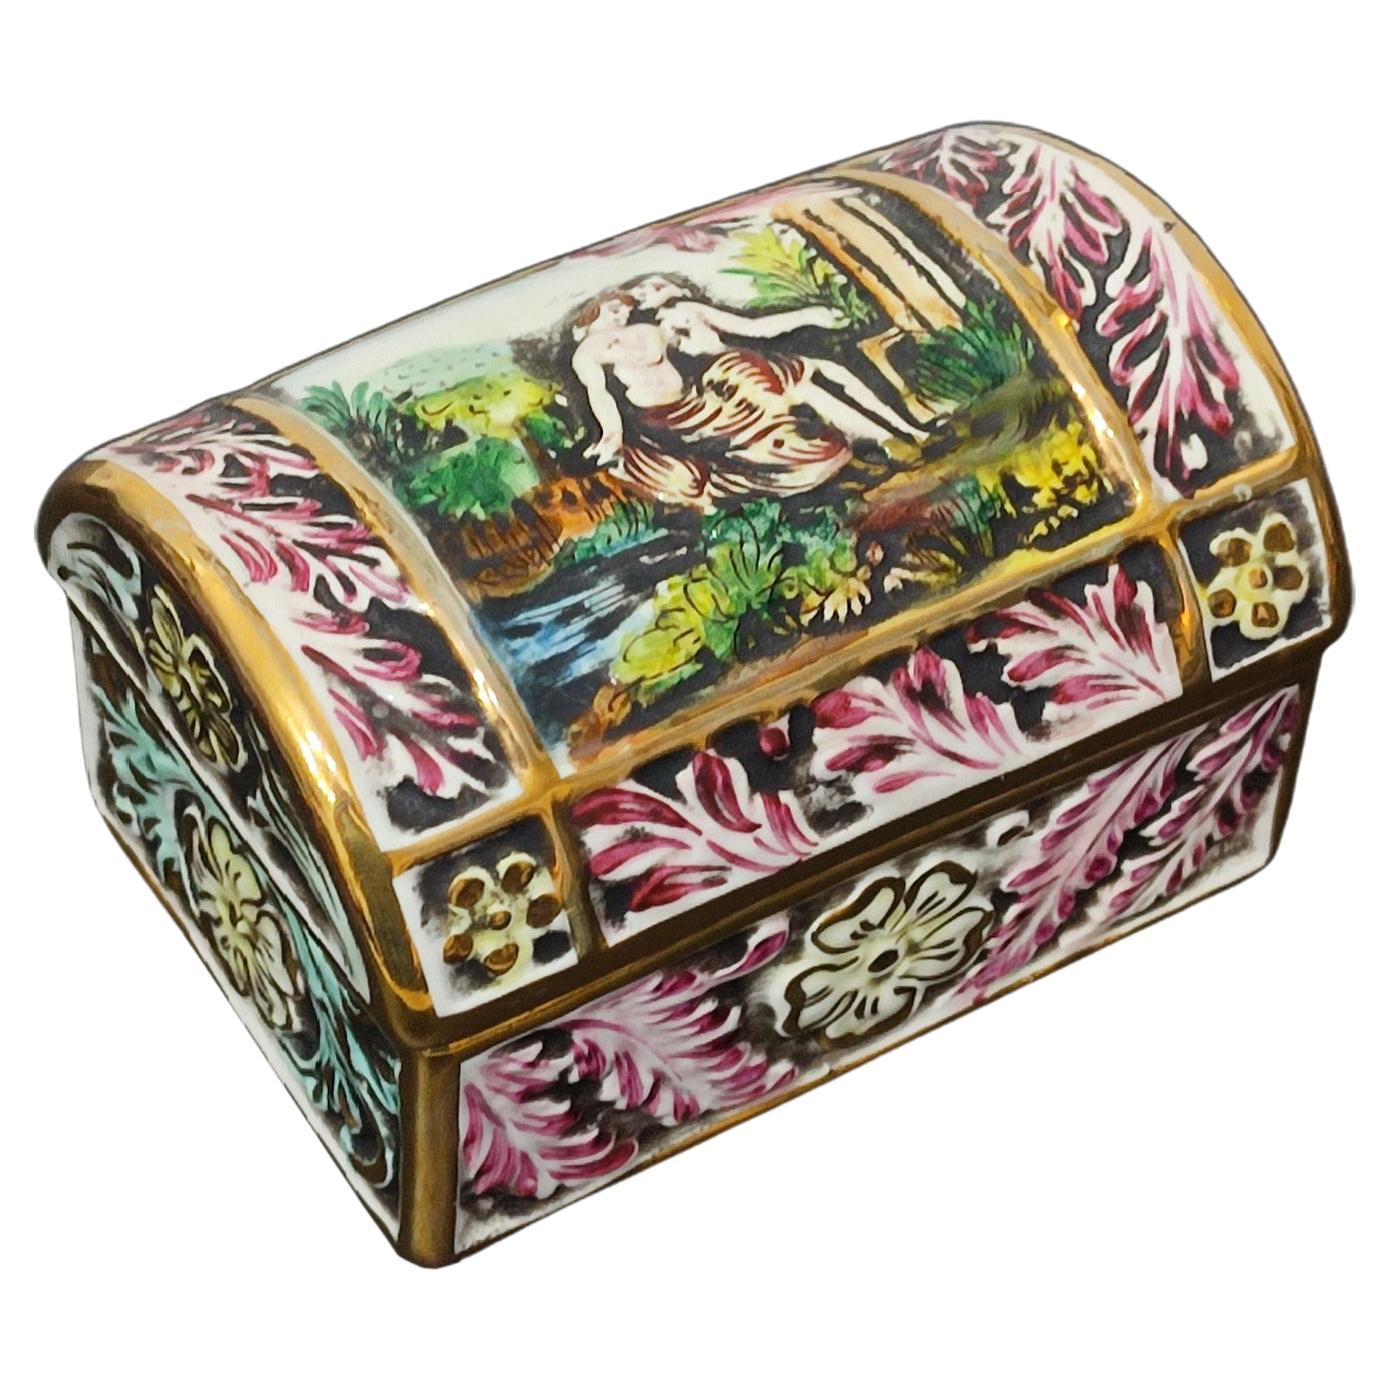 Capodimonte Porcelain Chest, Jewelry Box, Italy Mid 20th Century - FREE SHIPPING For Sale